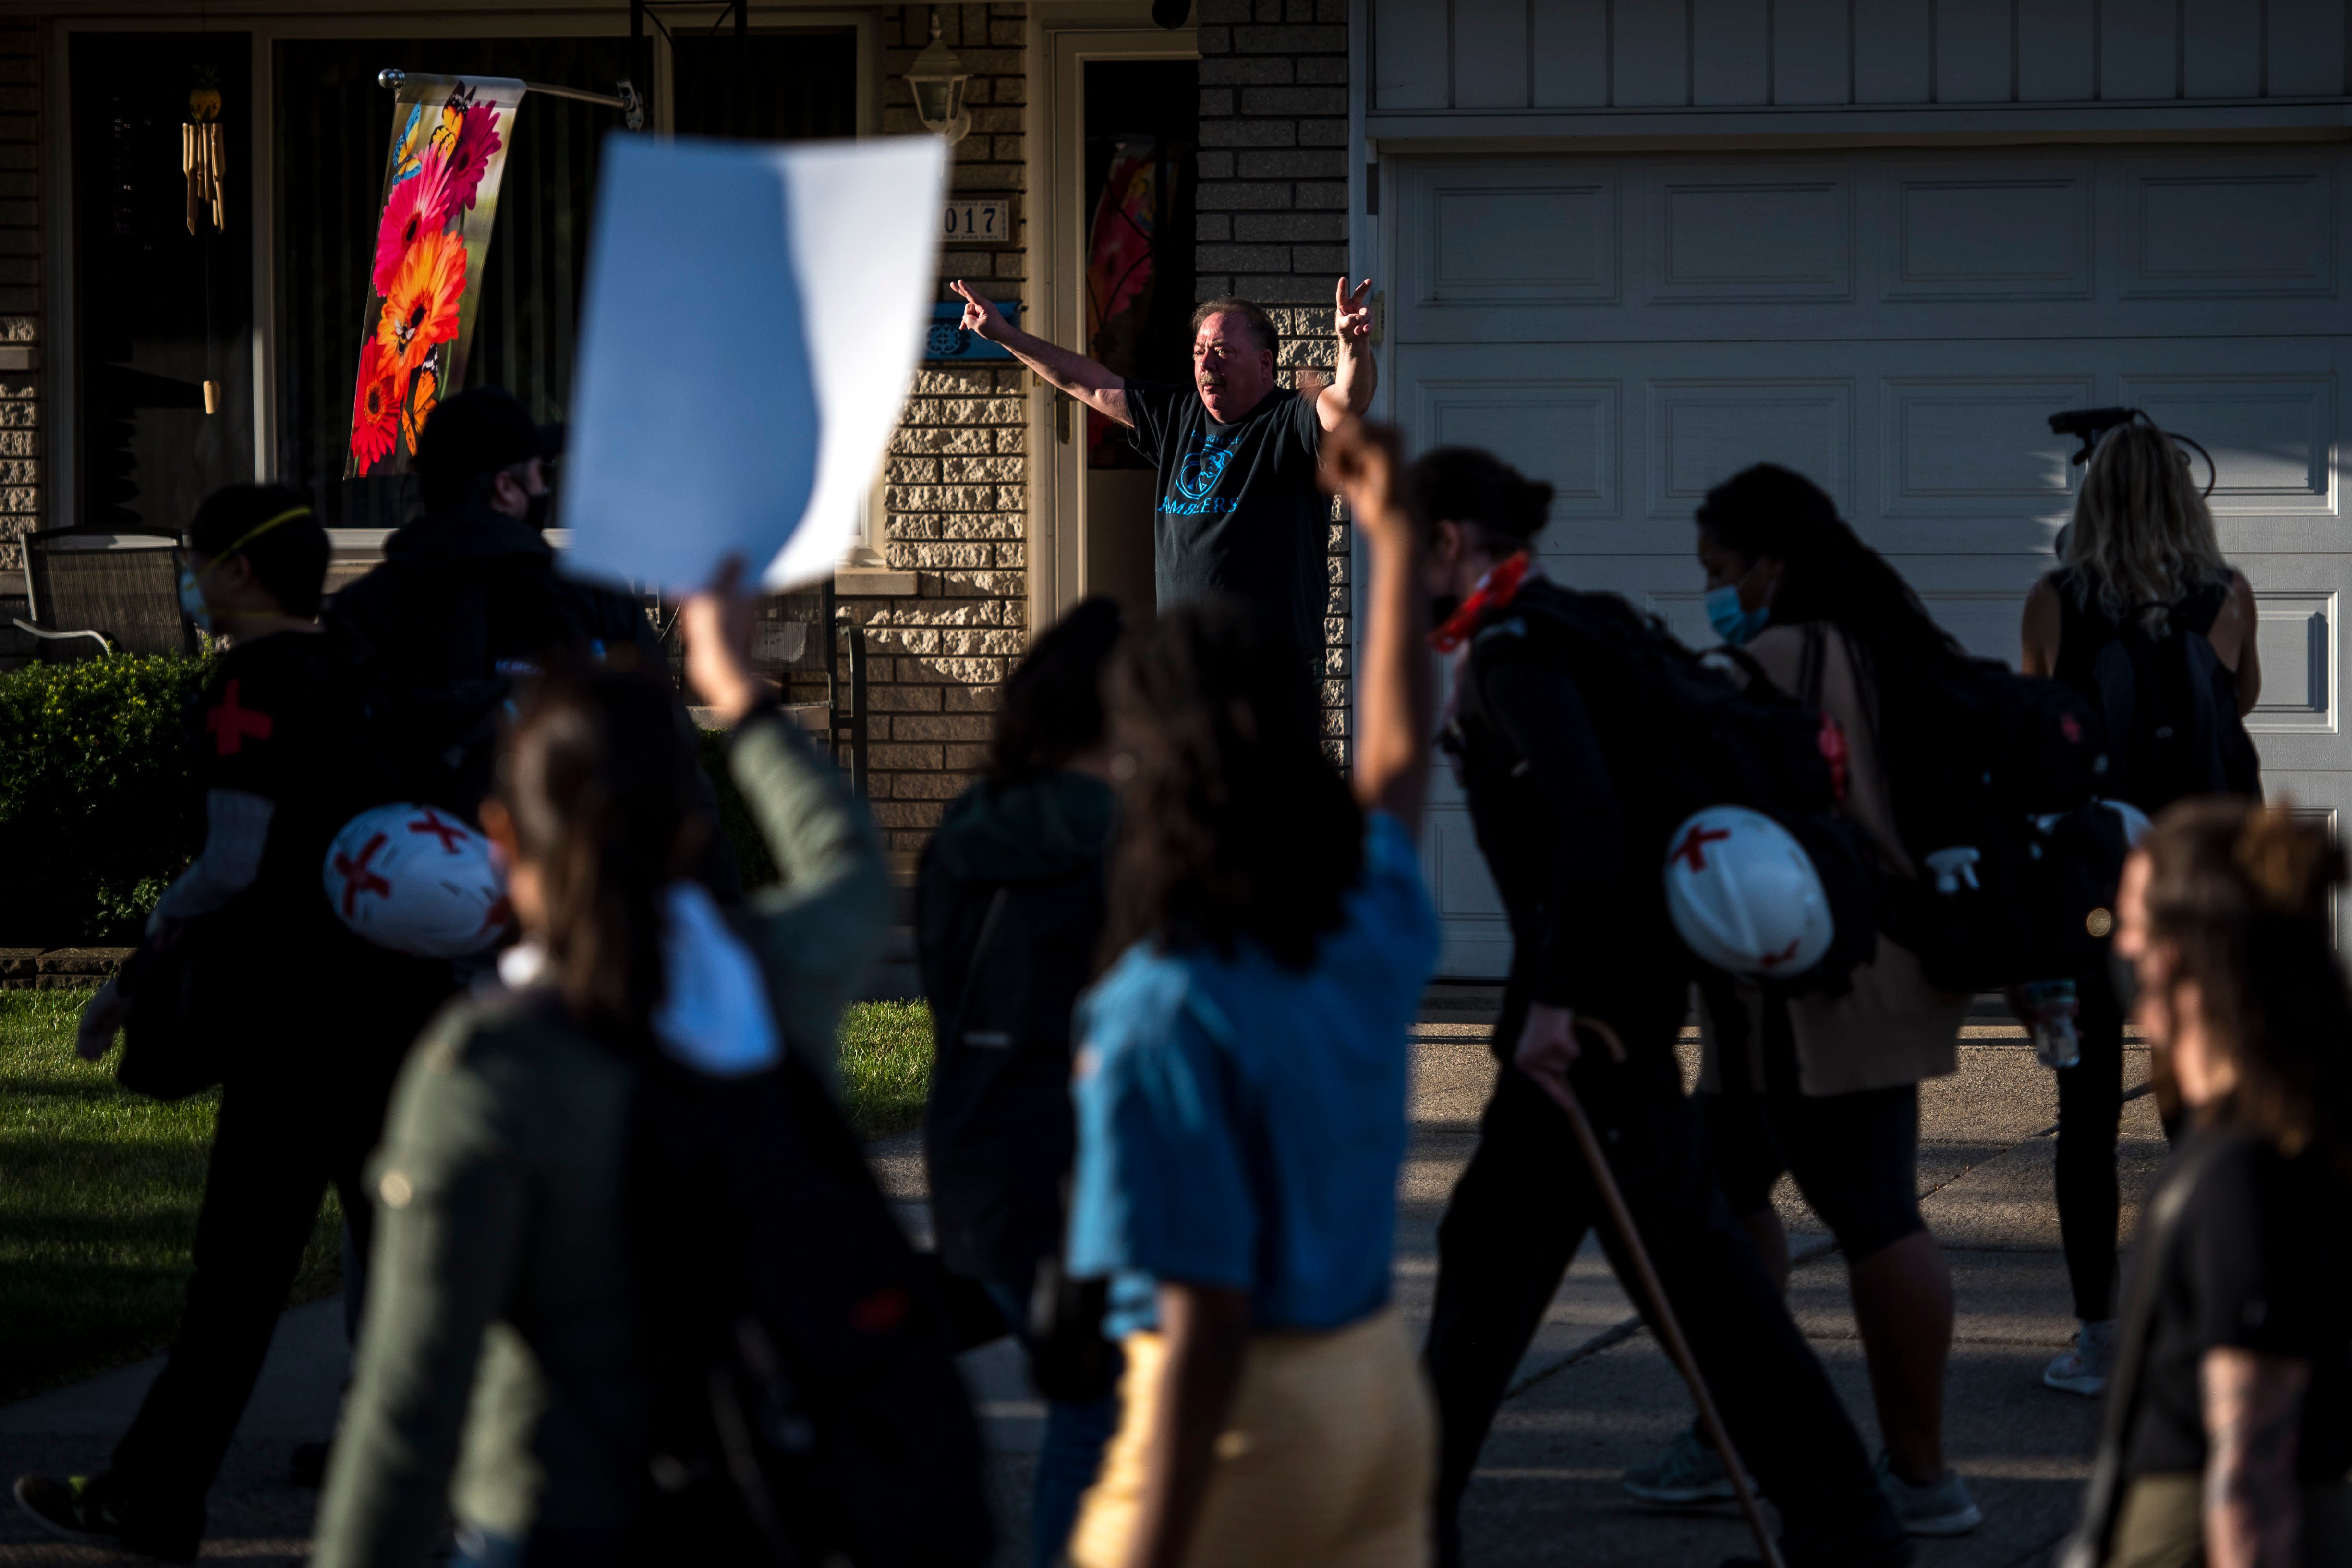 A man yells “Trump!” while protesters march past his home during the March Against Racism in Warren on Sept. 19, 2020. The march in Warren occurred in response to the city called hate crimes against residents Candace Hall, her husband Eddie and their two children.